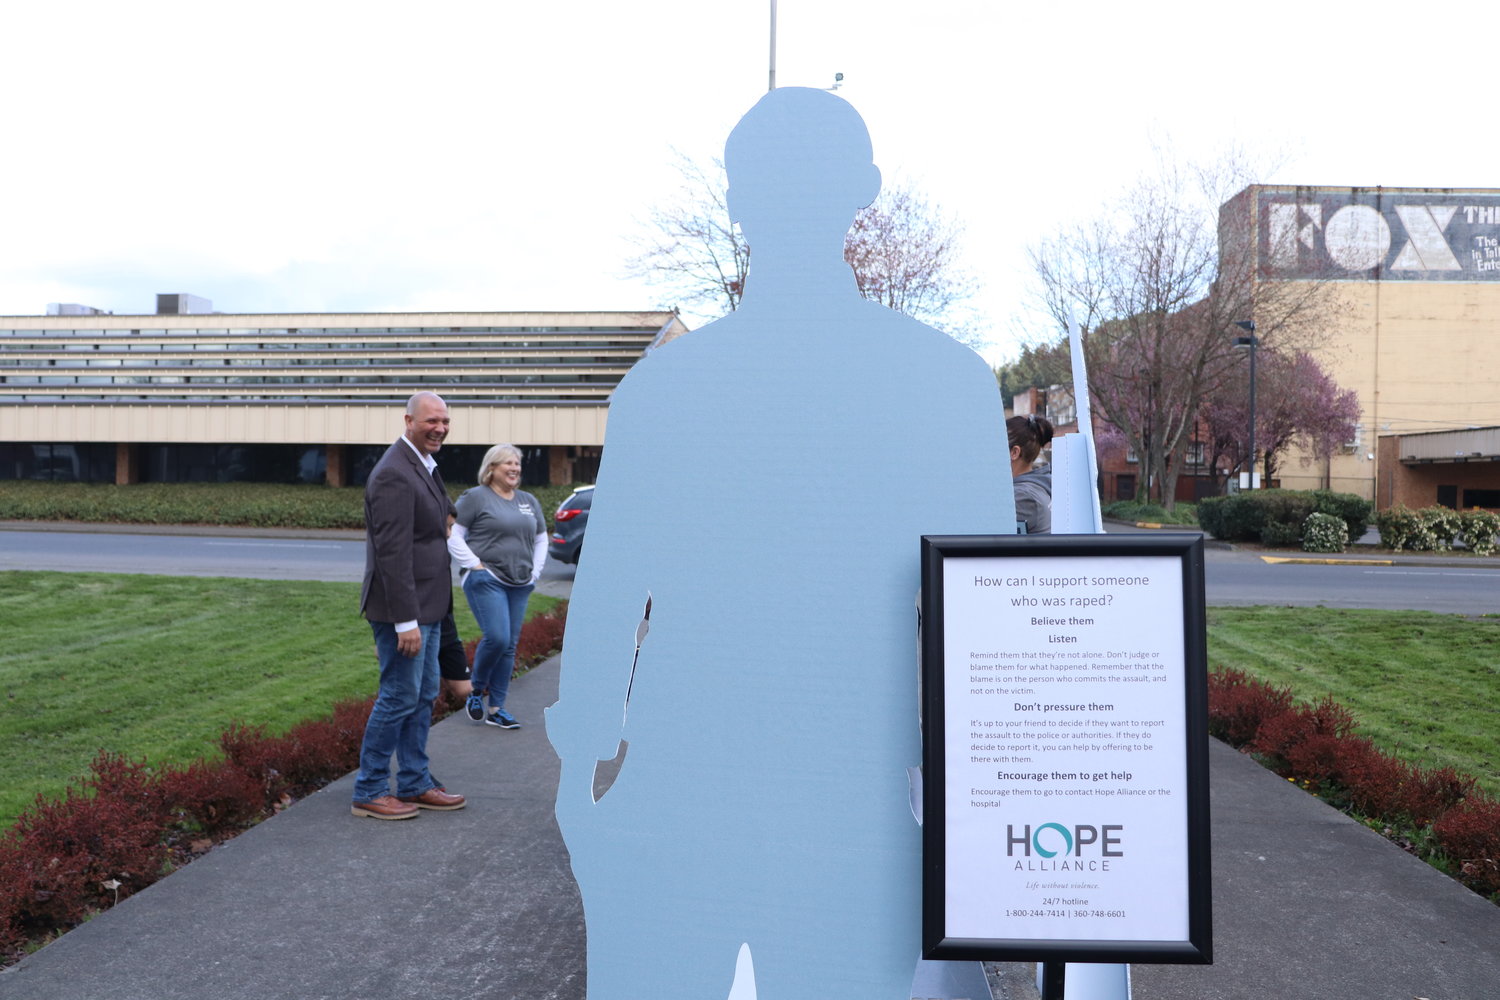 Hope Alliance kicked off Sexual Assault Awareness Month on Thursday with a self-guided walk at George Washington Park, where displays shared facts on sexual assault and created a space to remember sexual assault survivors.